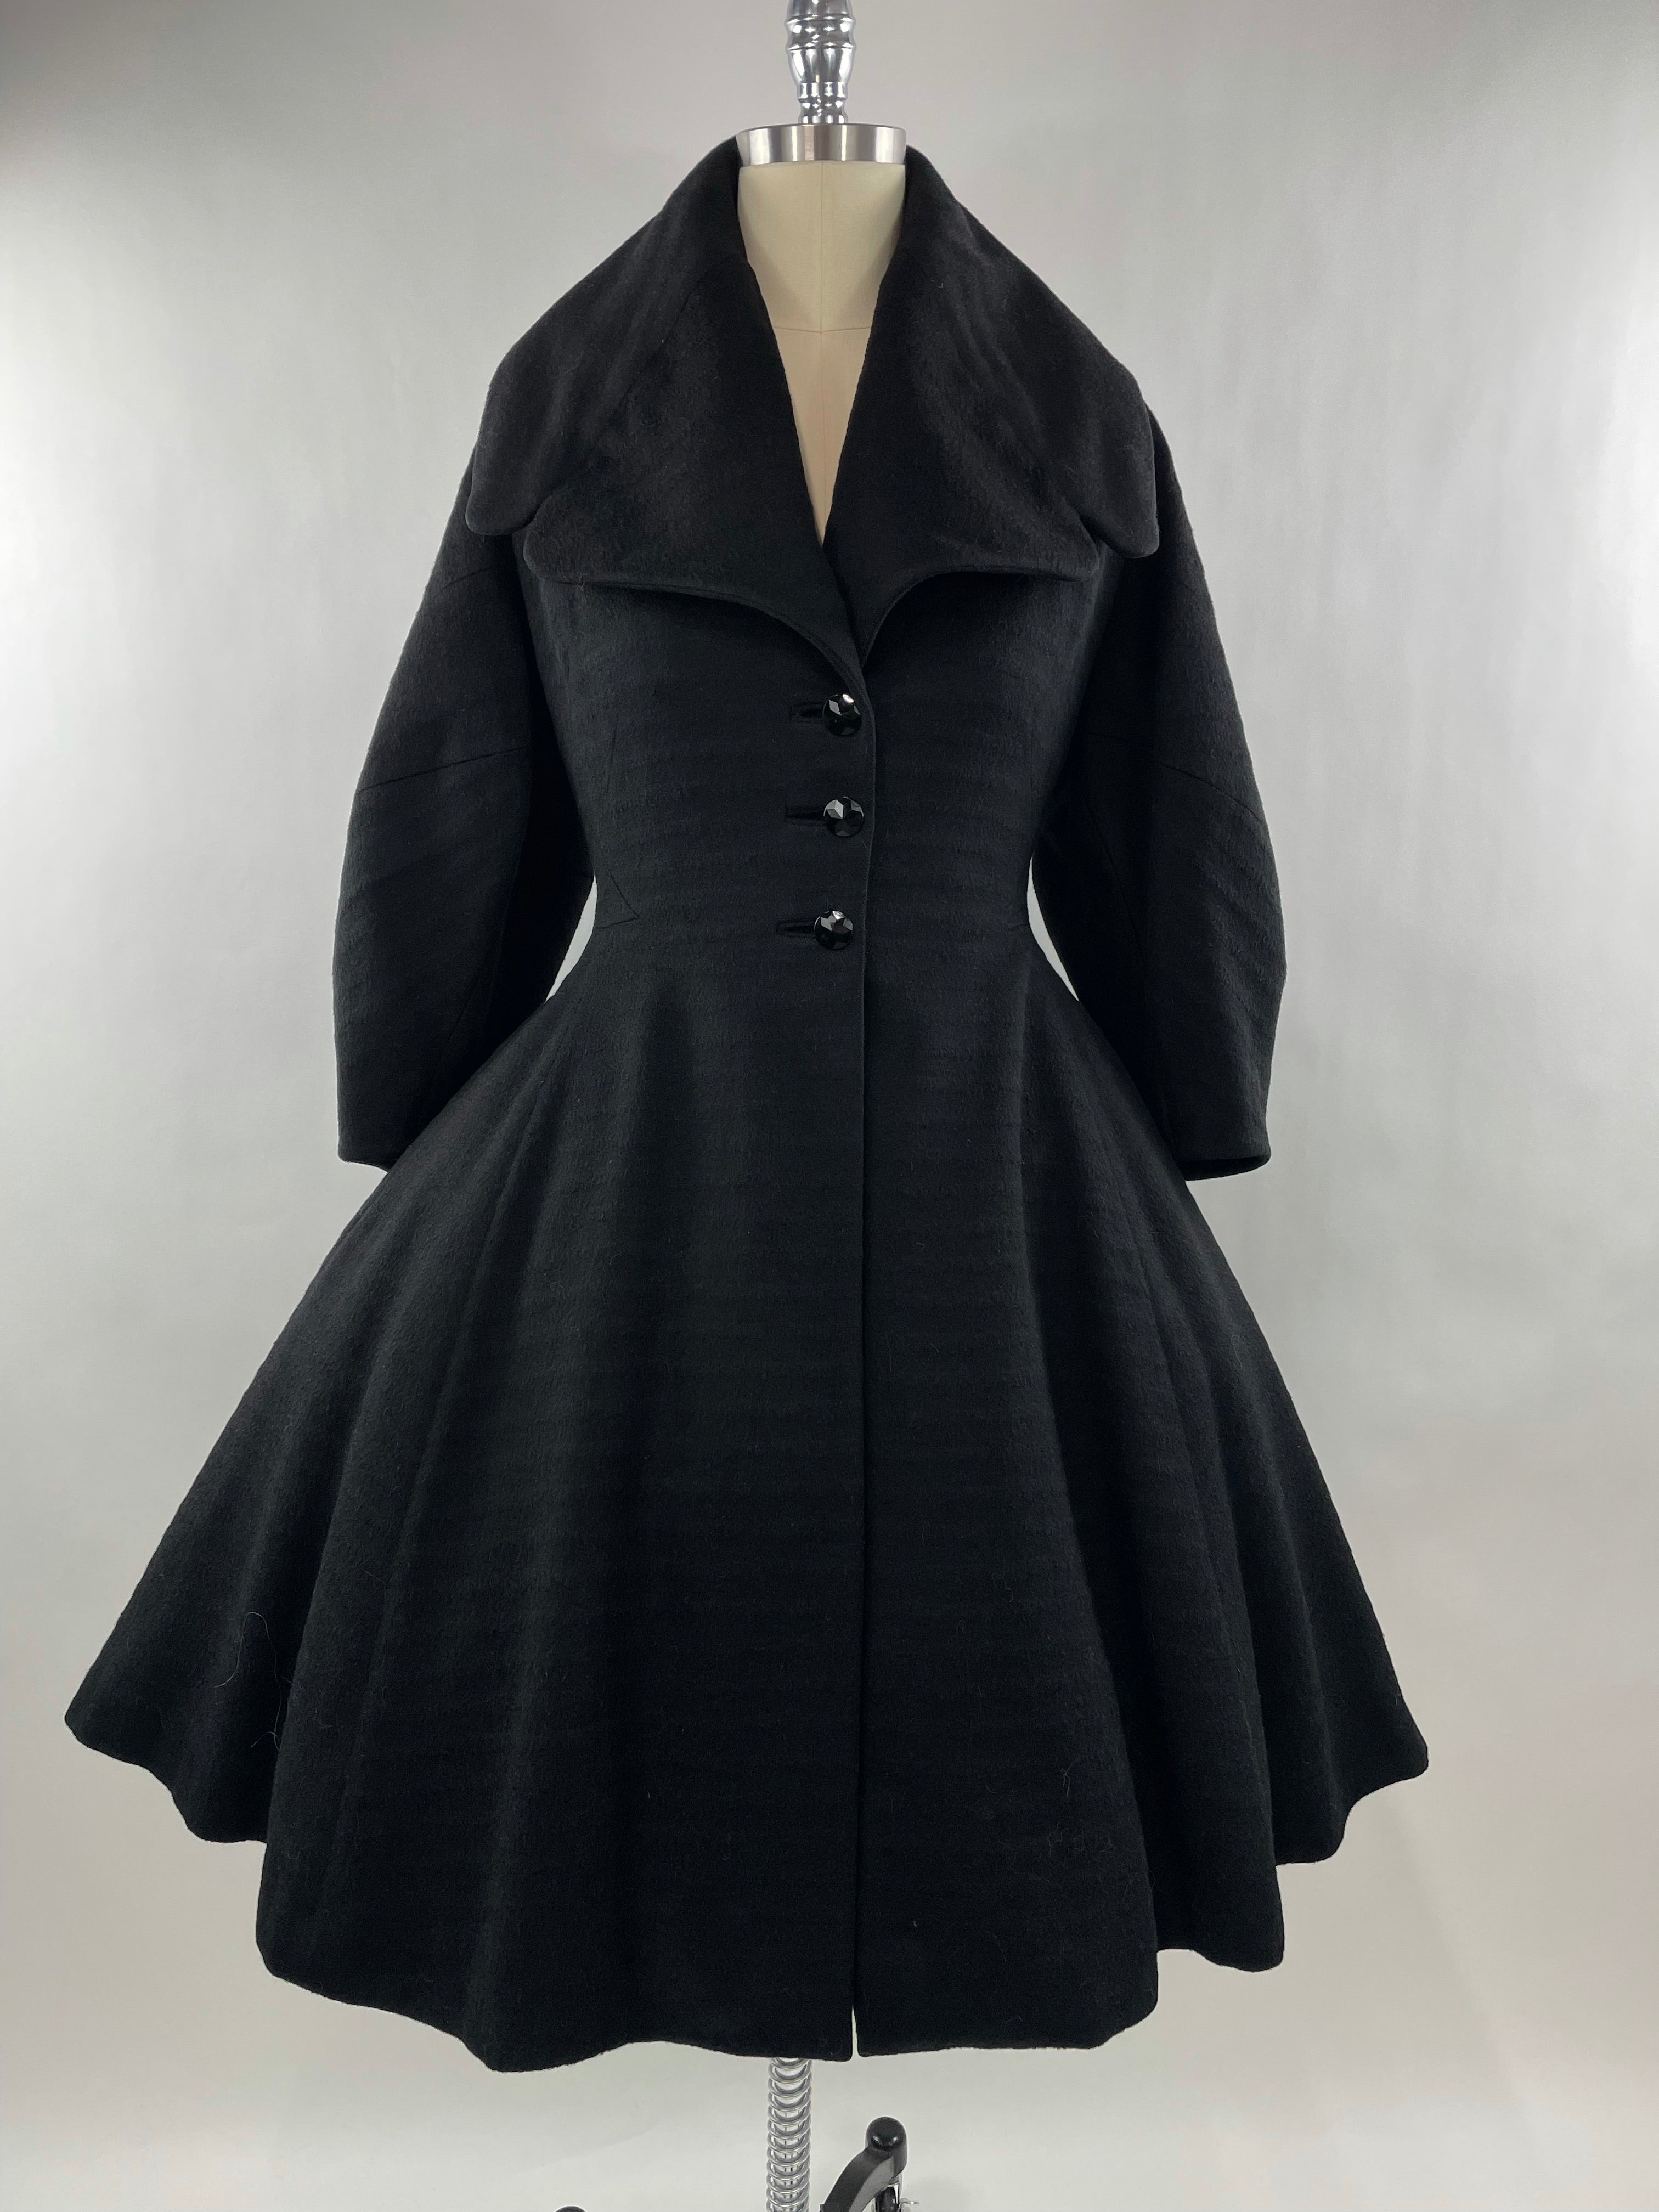 1950s Black Wool Lilli Ann Princess Coat with Exaggerated Collar and Sleeves Size L